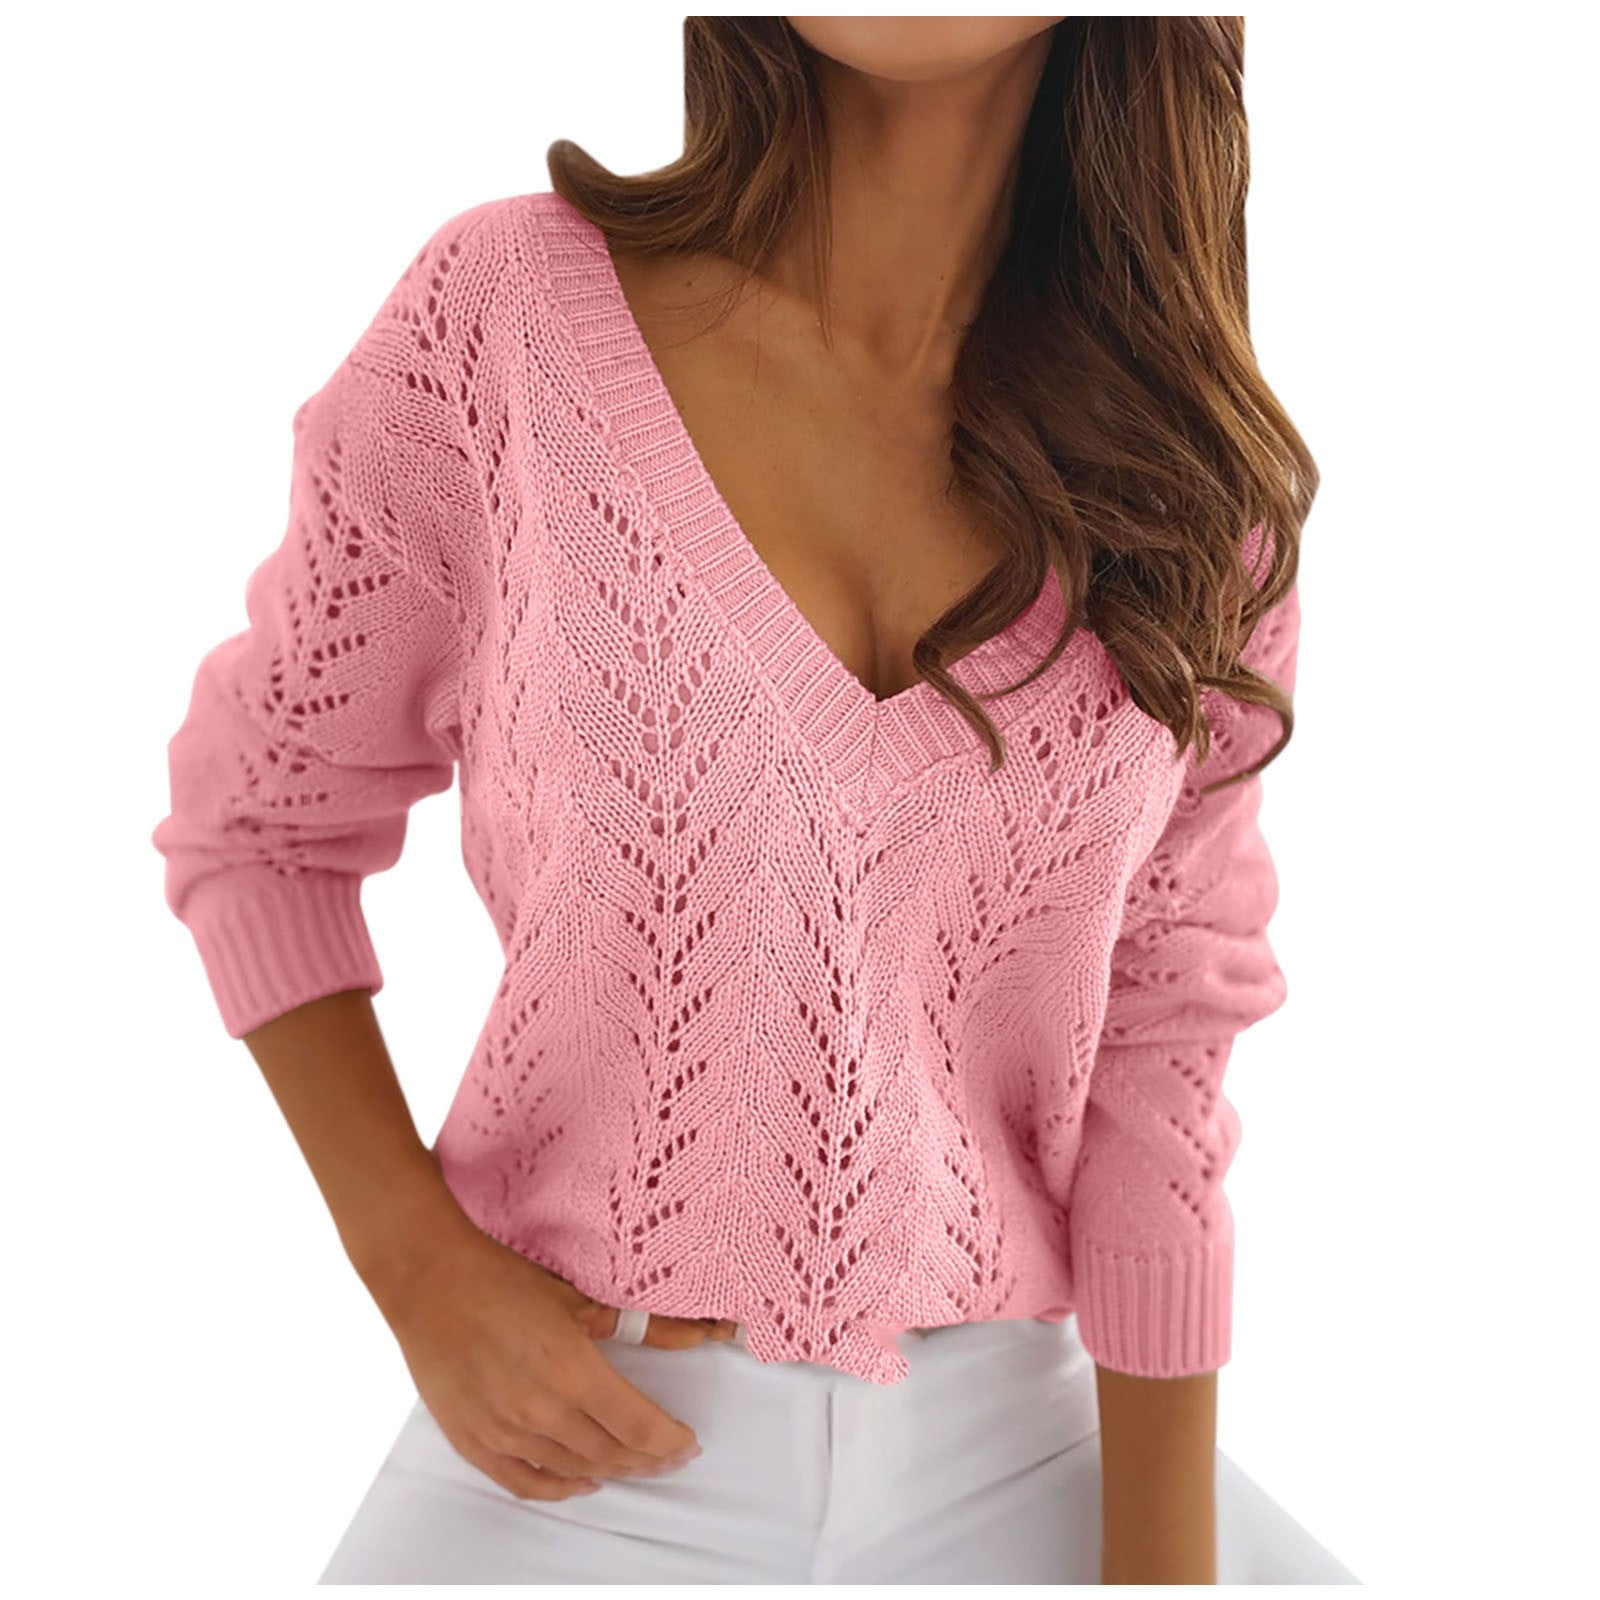 V Neck Sweater Crochet Top Long Sleeve Dressy Casual Fall Outfit Knit Top Blouses -